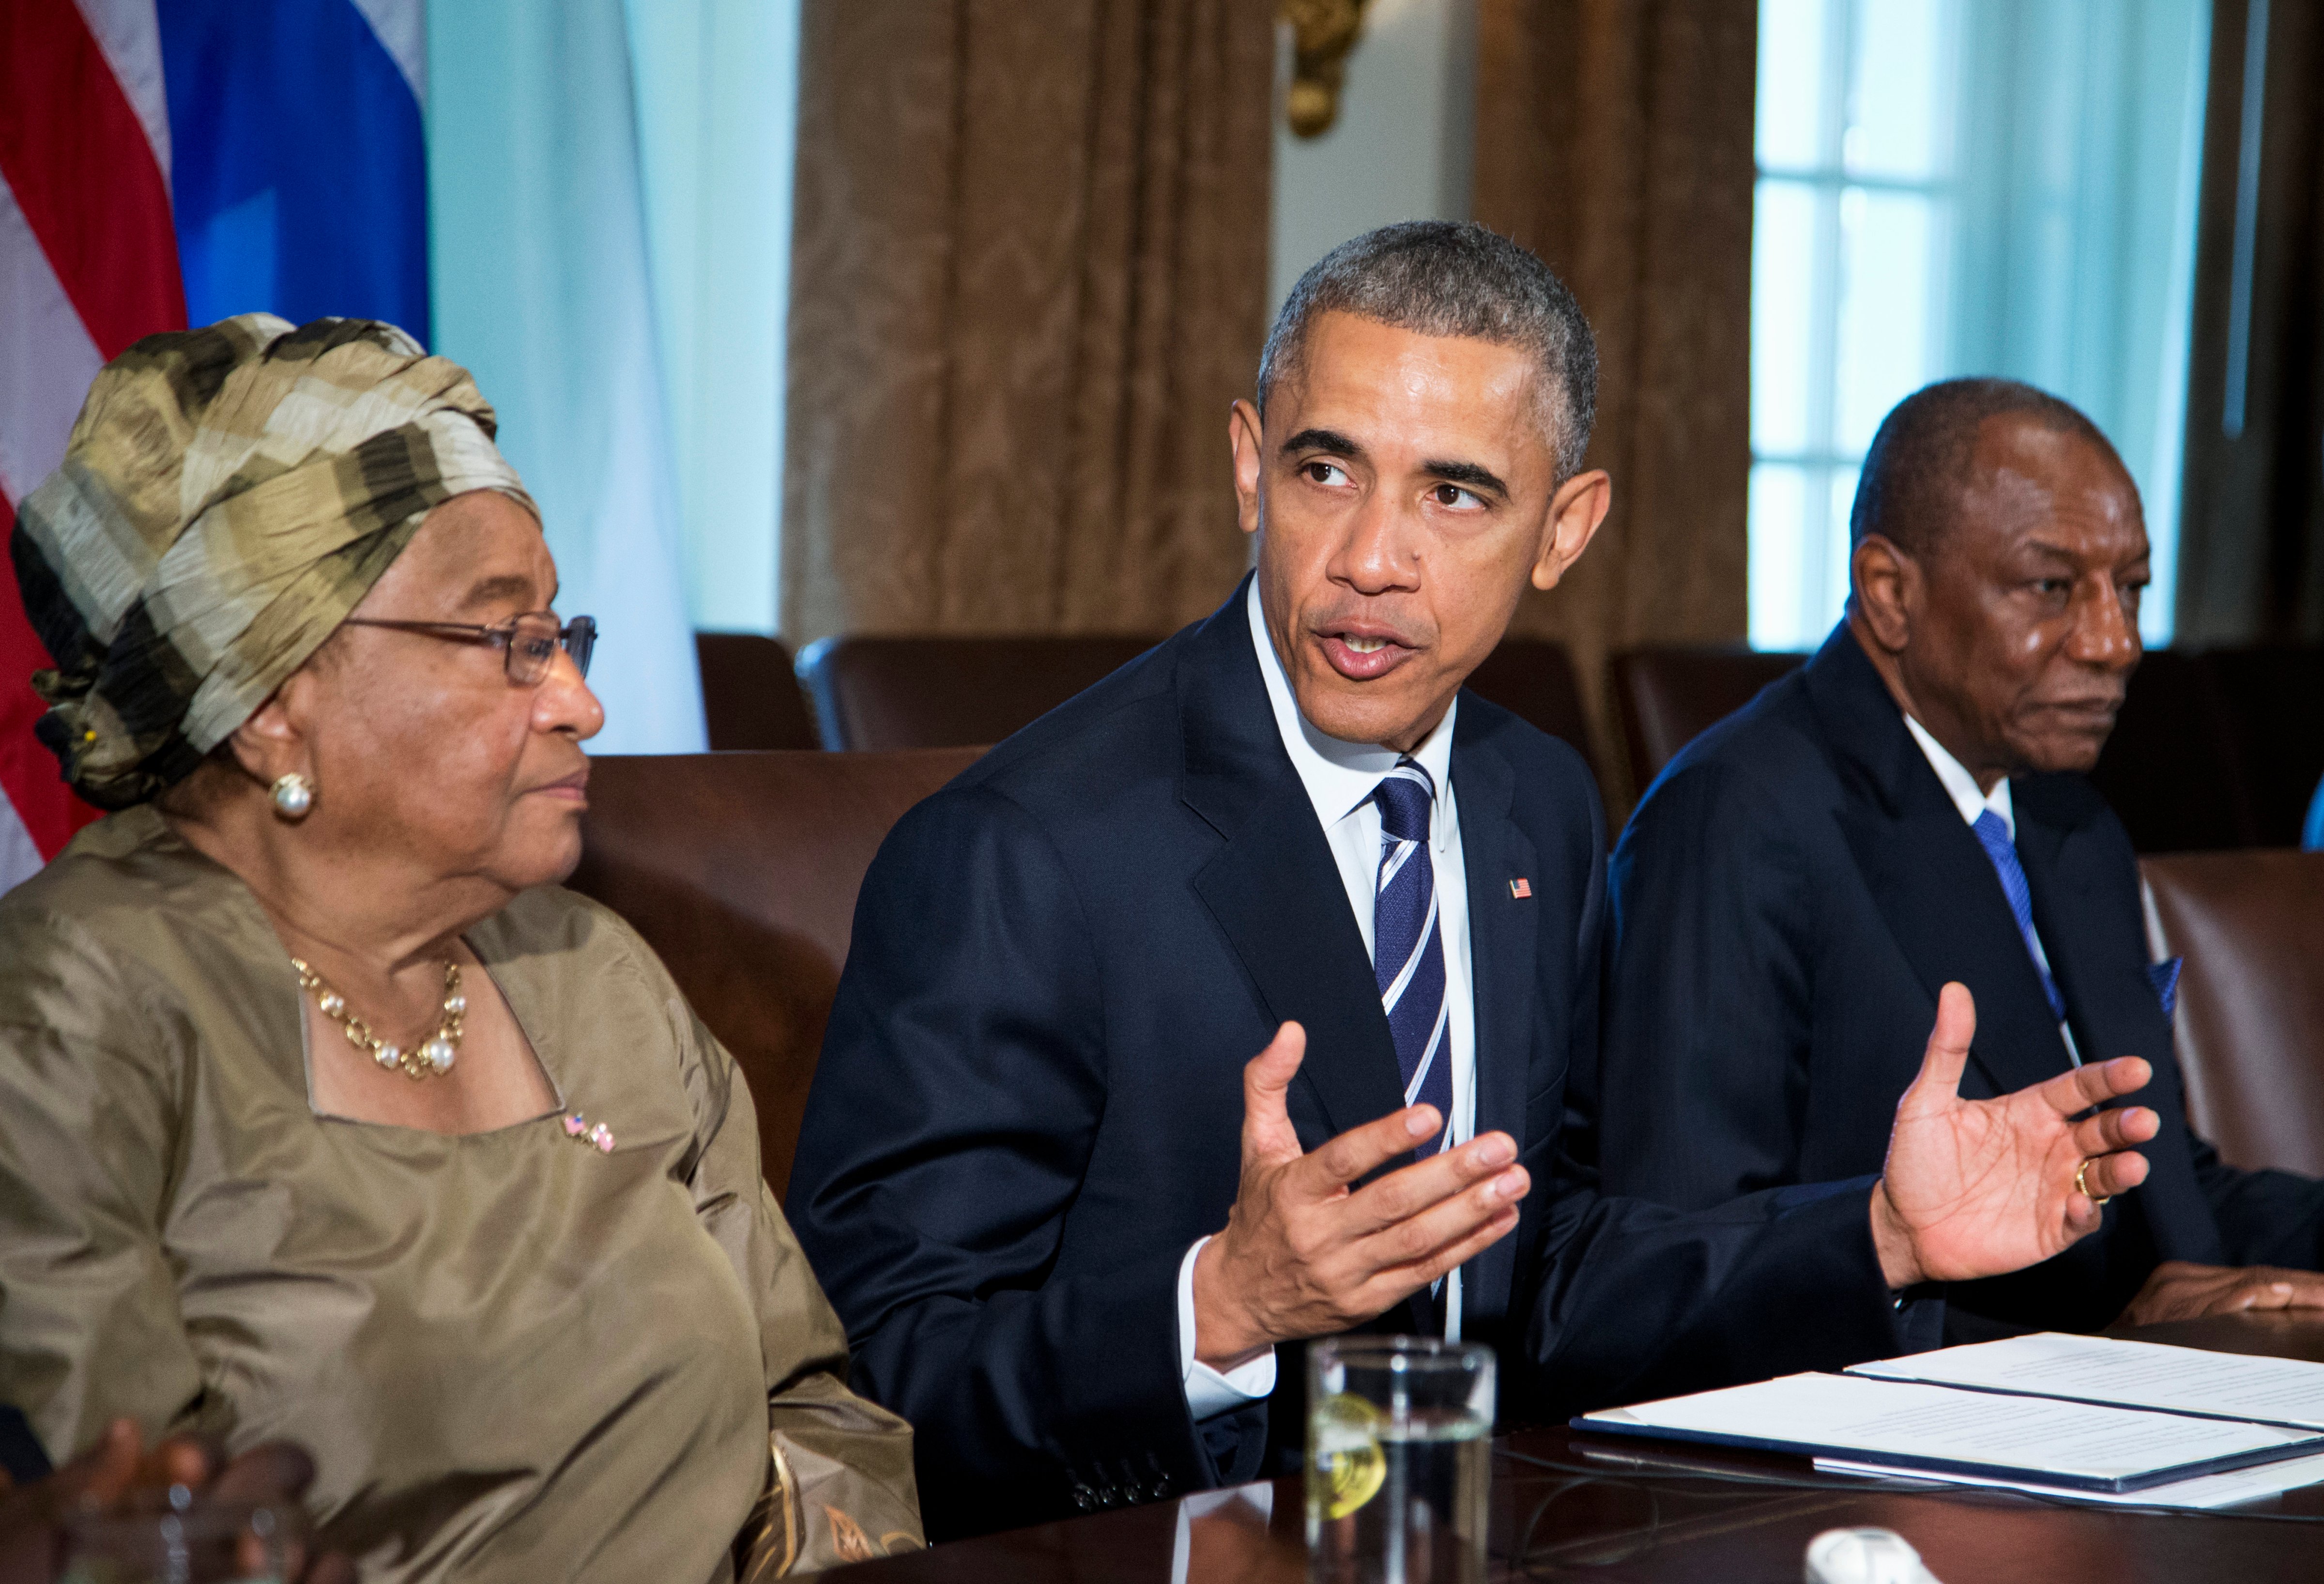 President Barack Obama, flanked by Liberian President Ellen Johnson Sirleaf, left, and Guinean President Alpha Condé, speaks in the Cabinet Room of the White House in Washington, Wednesday, April 15, 2015, to discuss the progress made in the international Ebola response. (Manuel Balce Ceneta—AP)